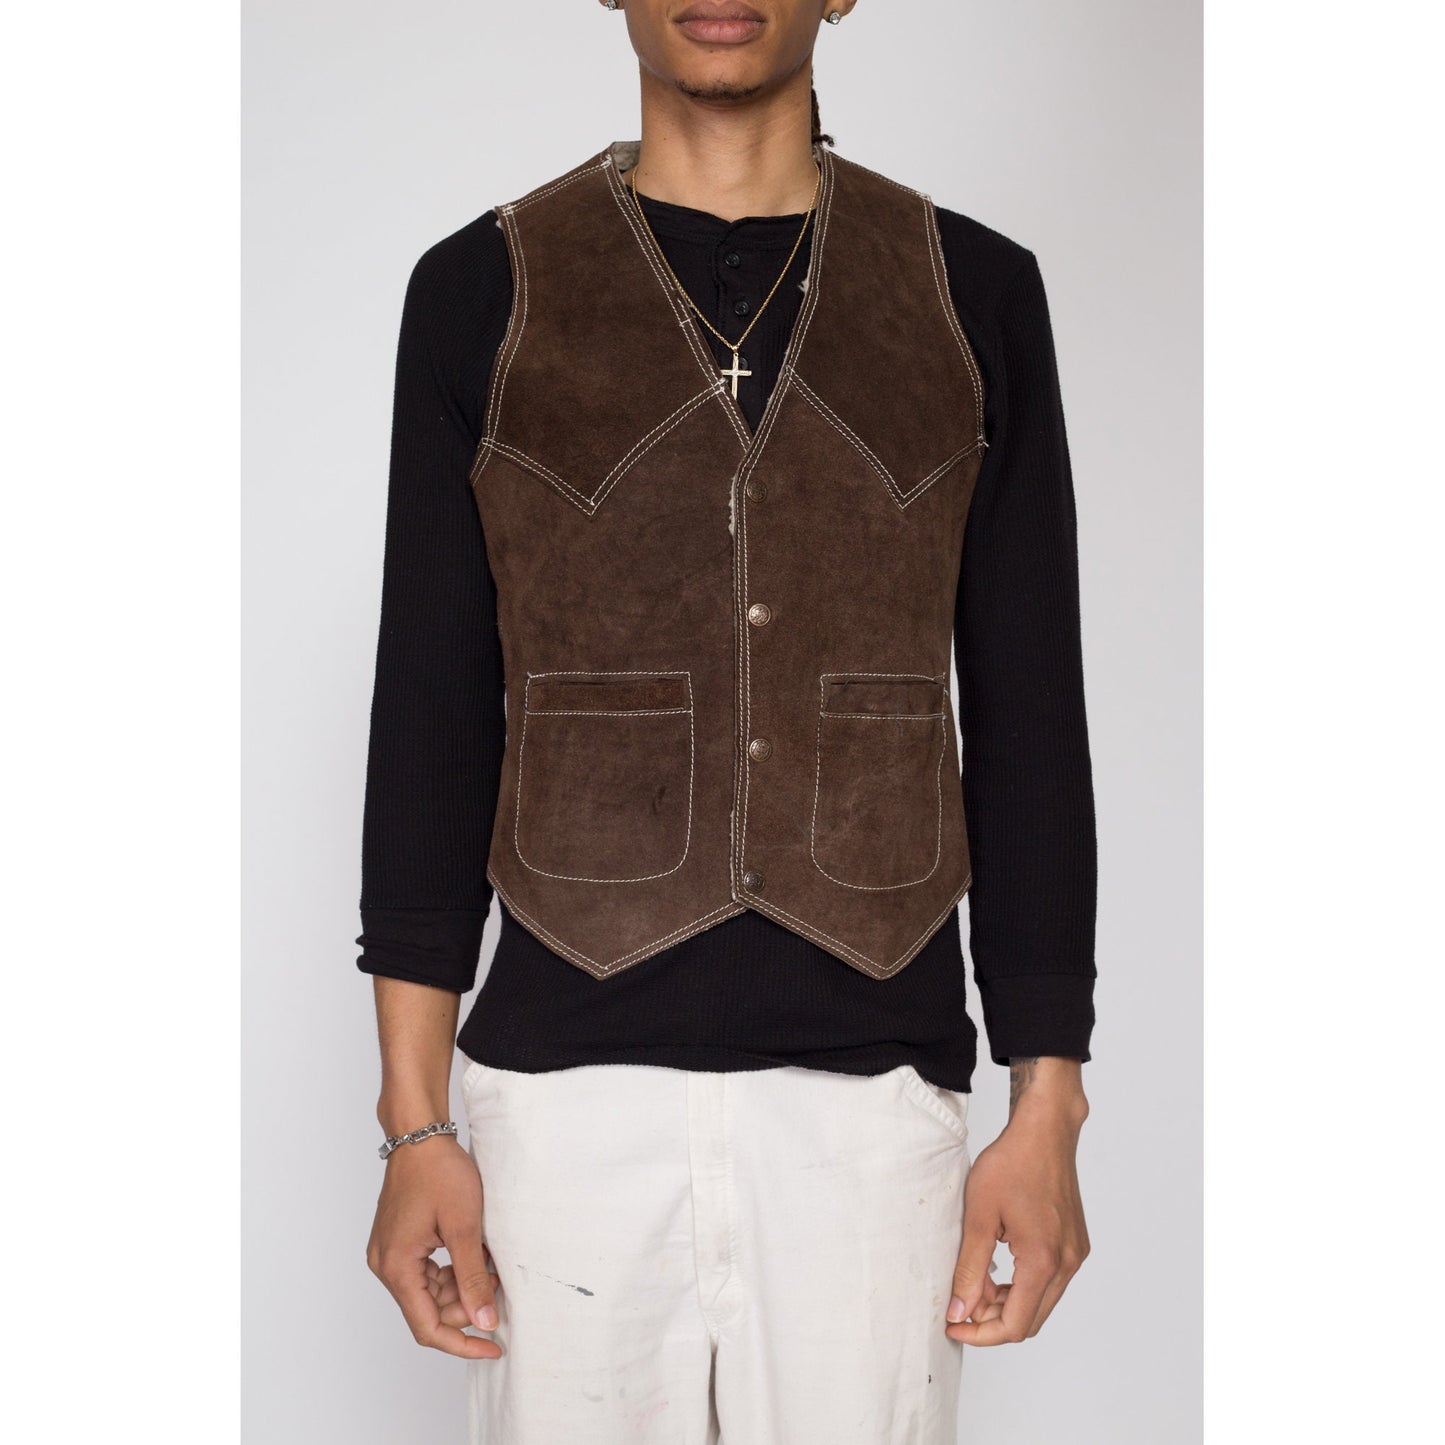 XS 70s Dark Brown Suede Sherpa Vest | Vintage Made In Mexico Western Leather Shearling Lined Vest